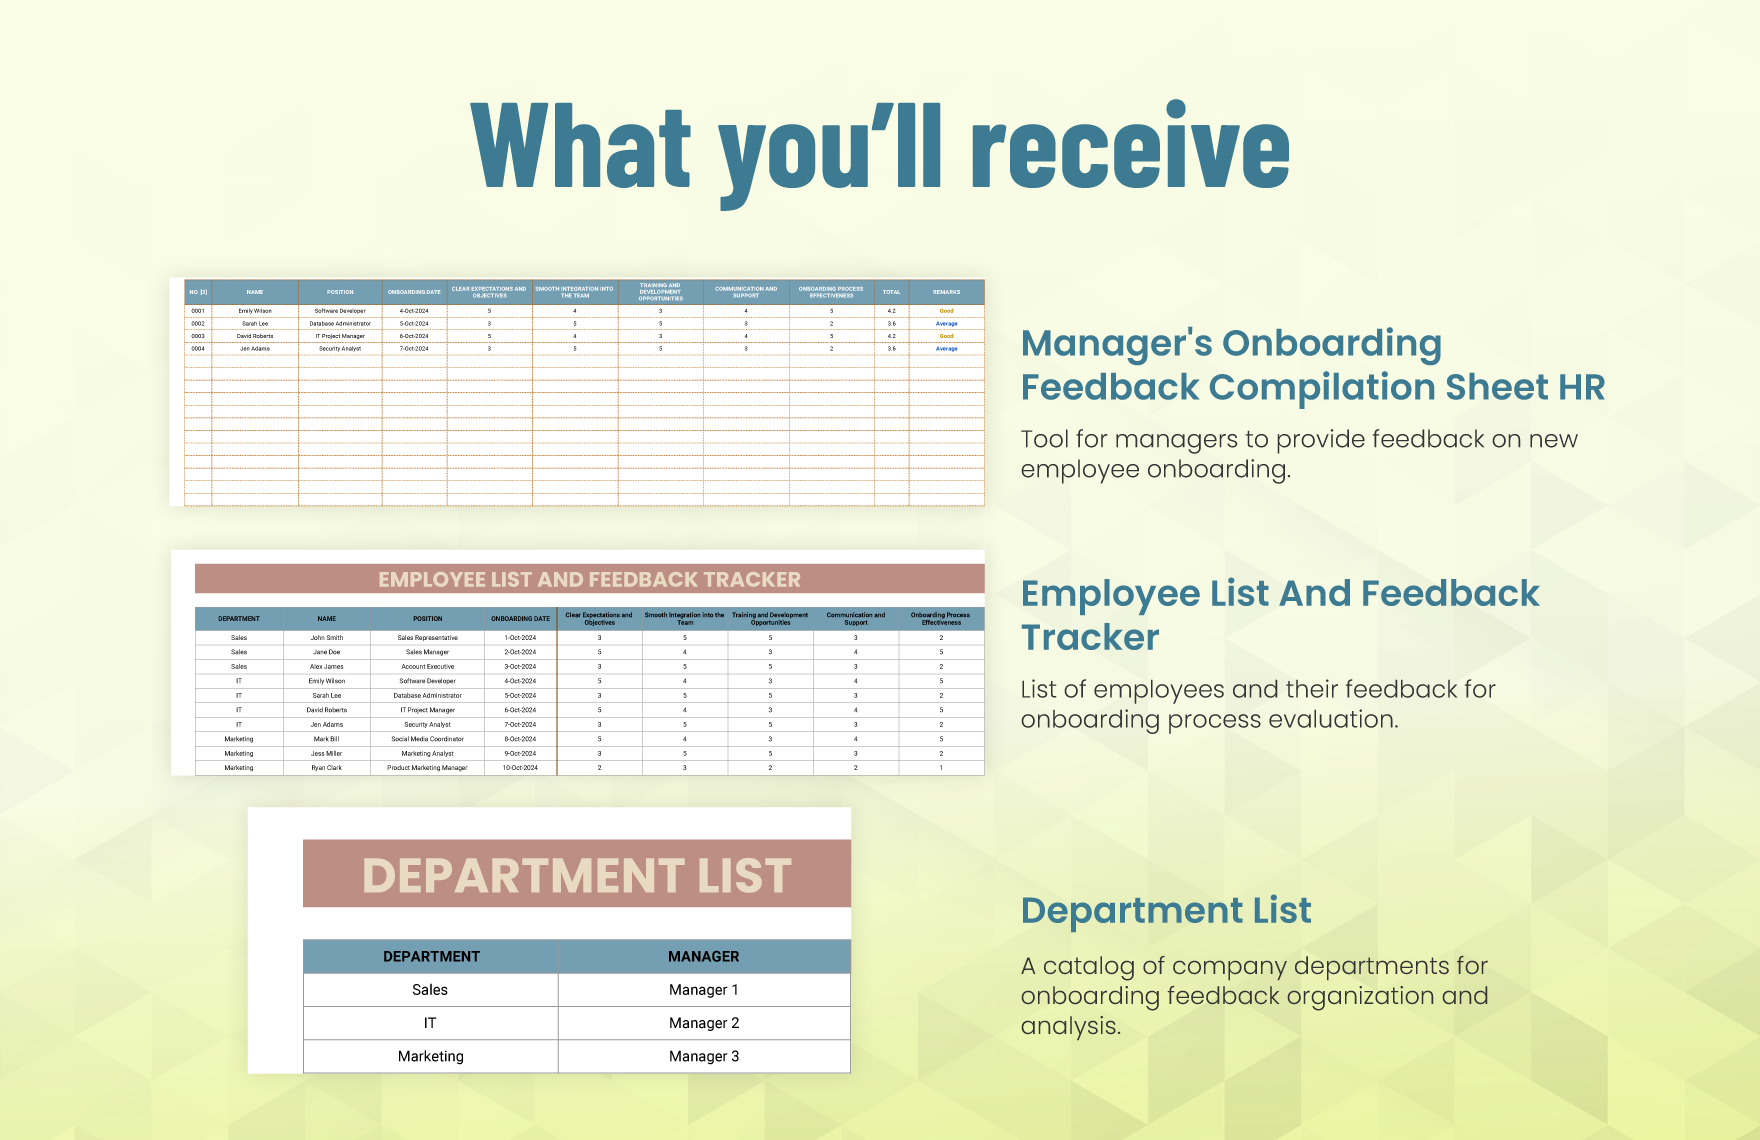 Manager's Onboarding Feedback Compilation Sheet HR Template